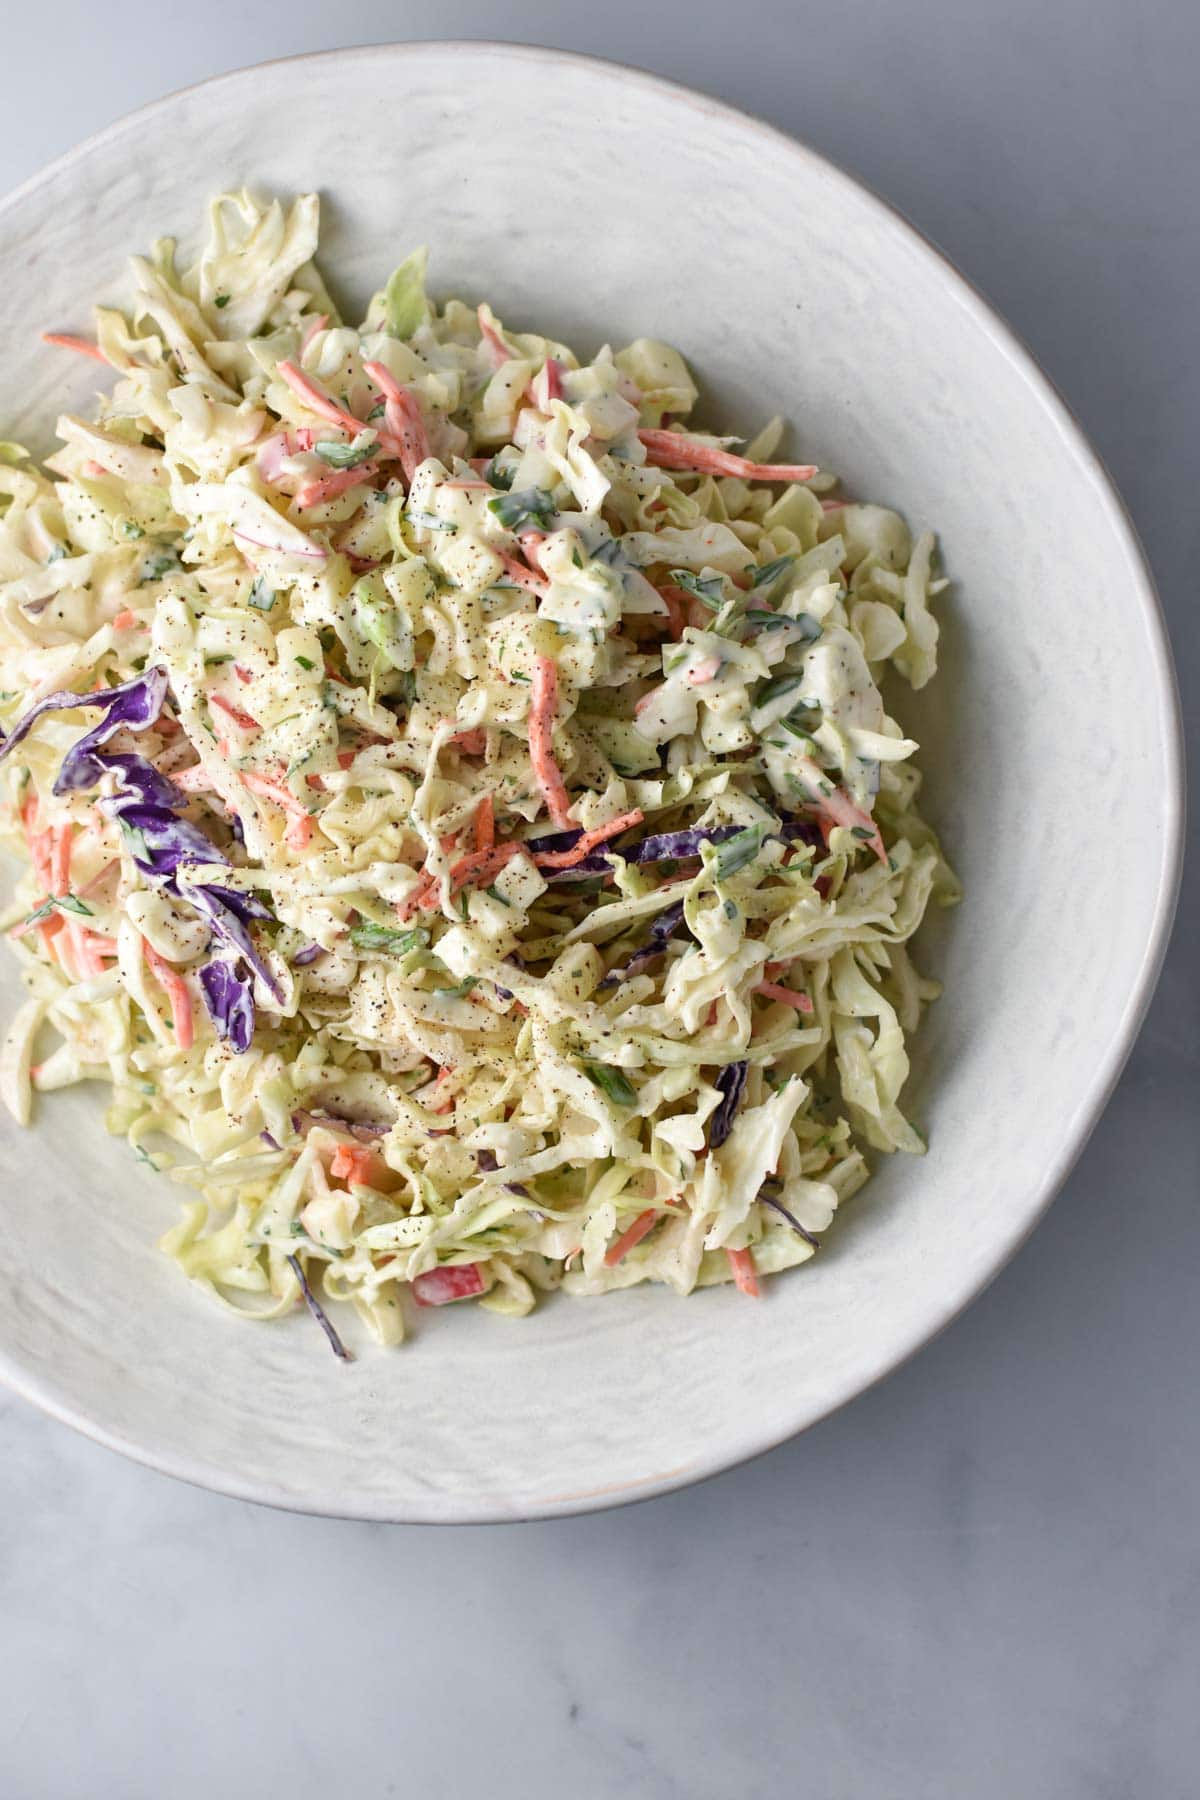 Creamy coleslaw in a white bowl on a white table.